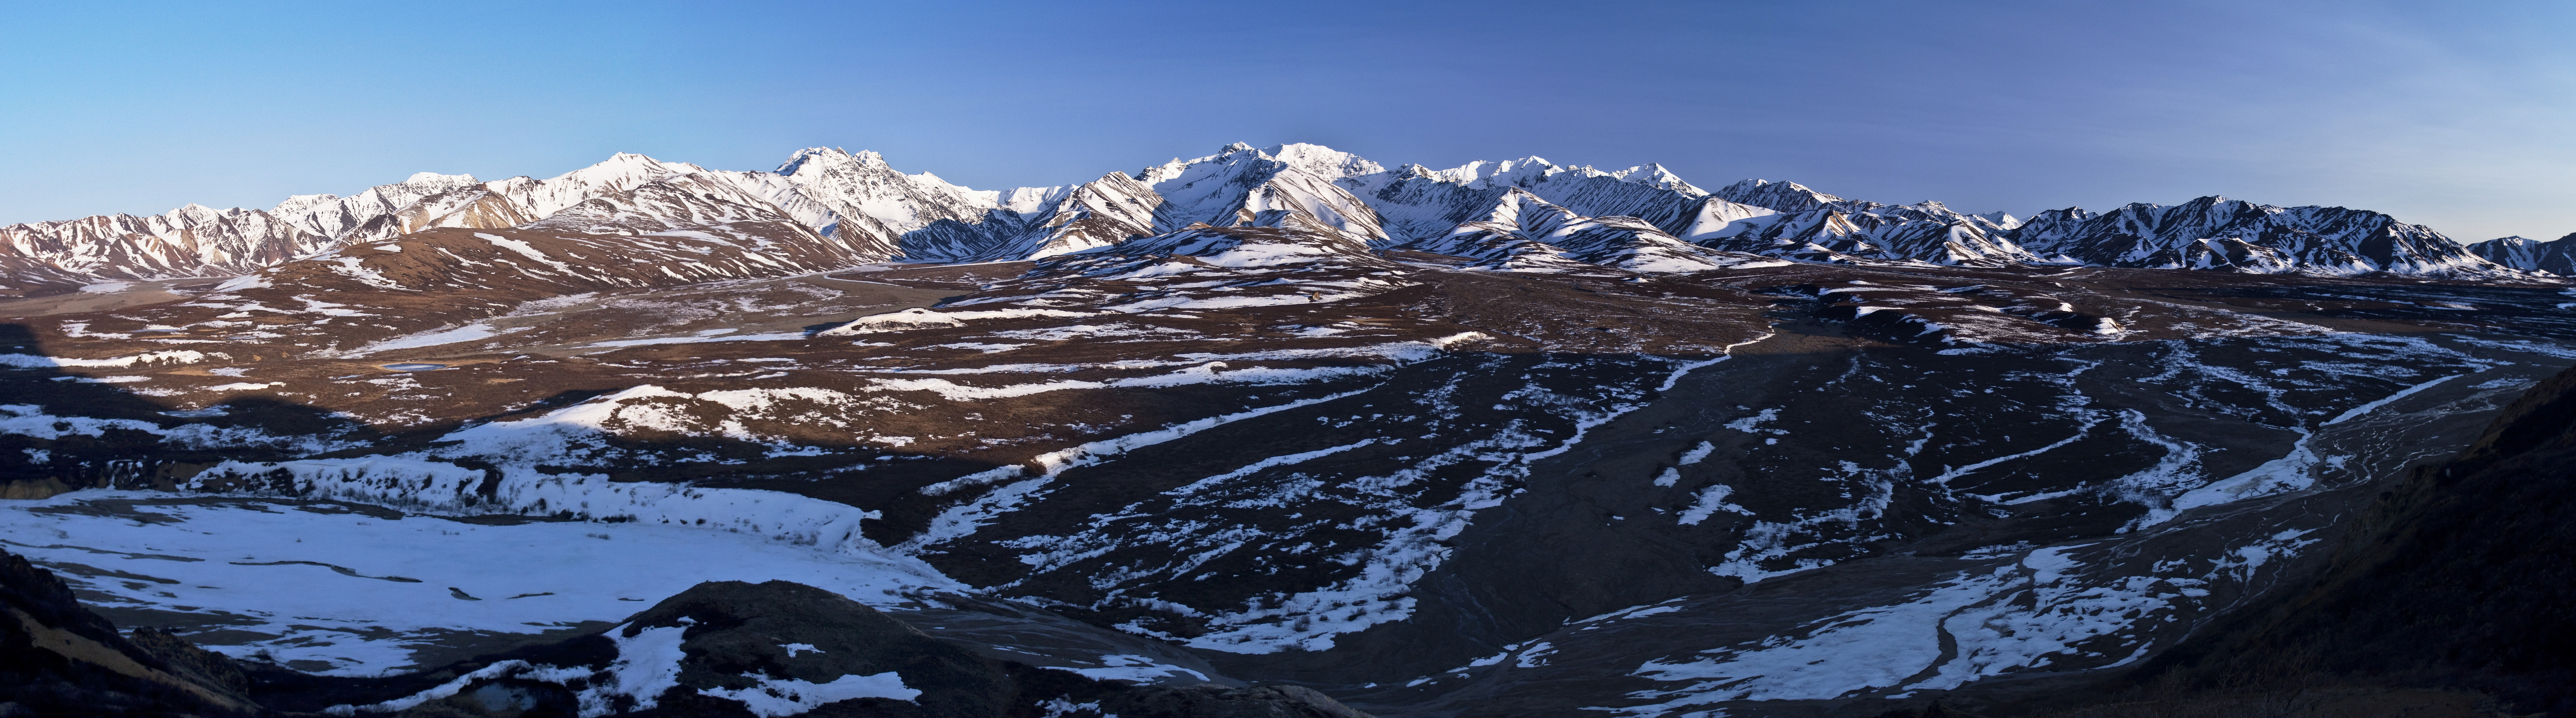 landscape of frozen rivers and snowy mountains